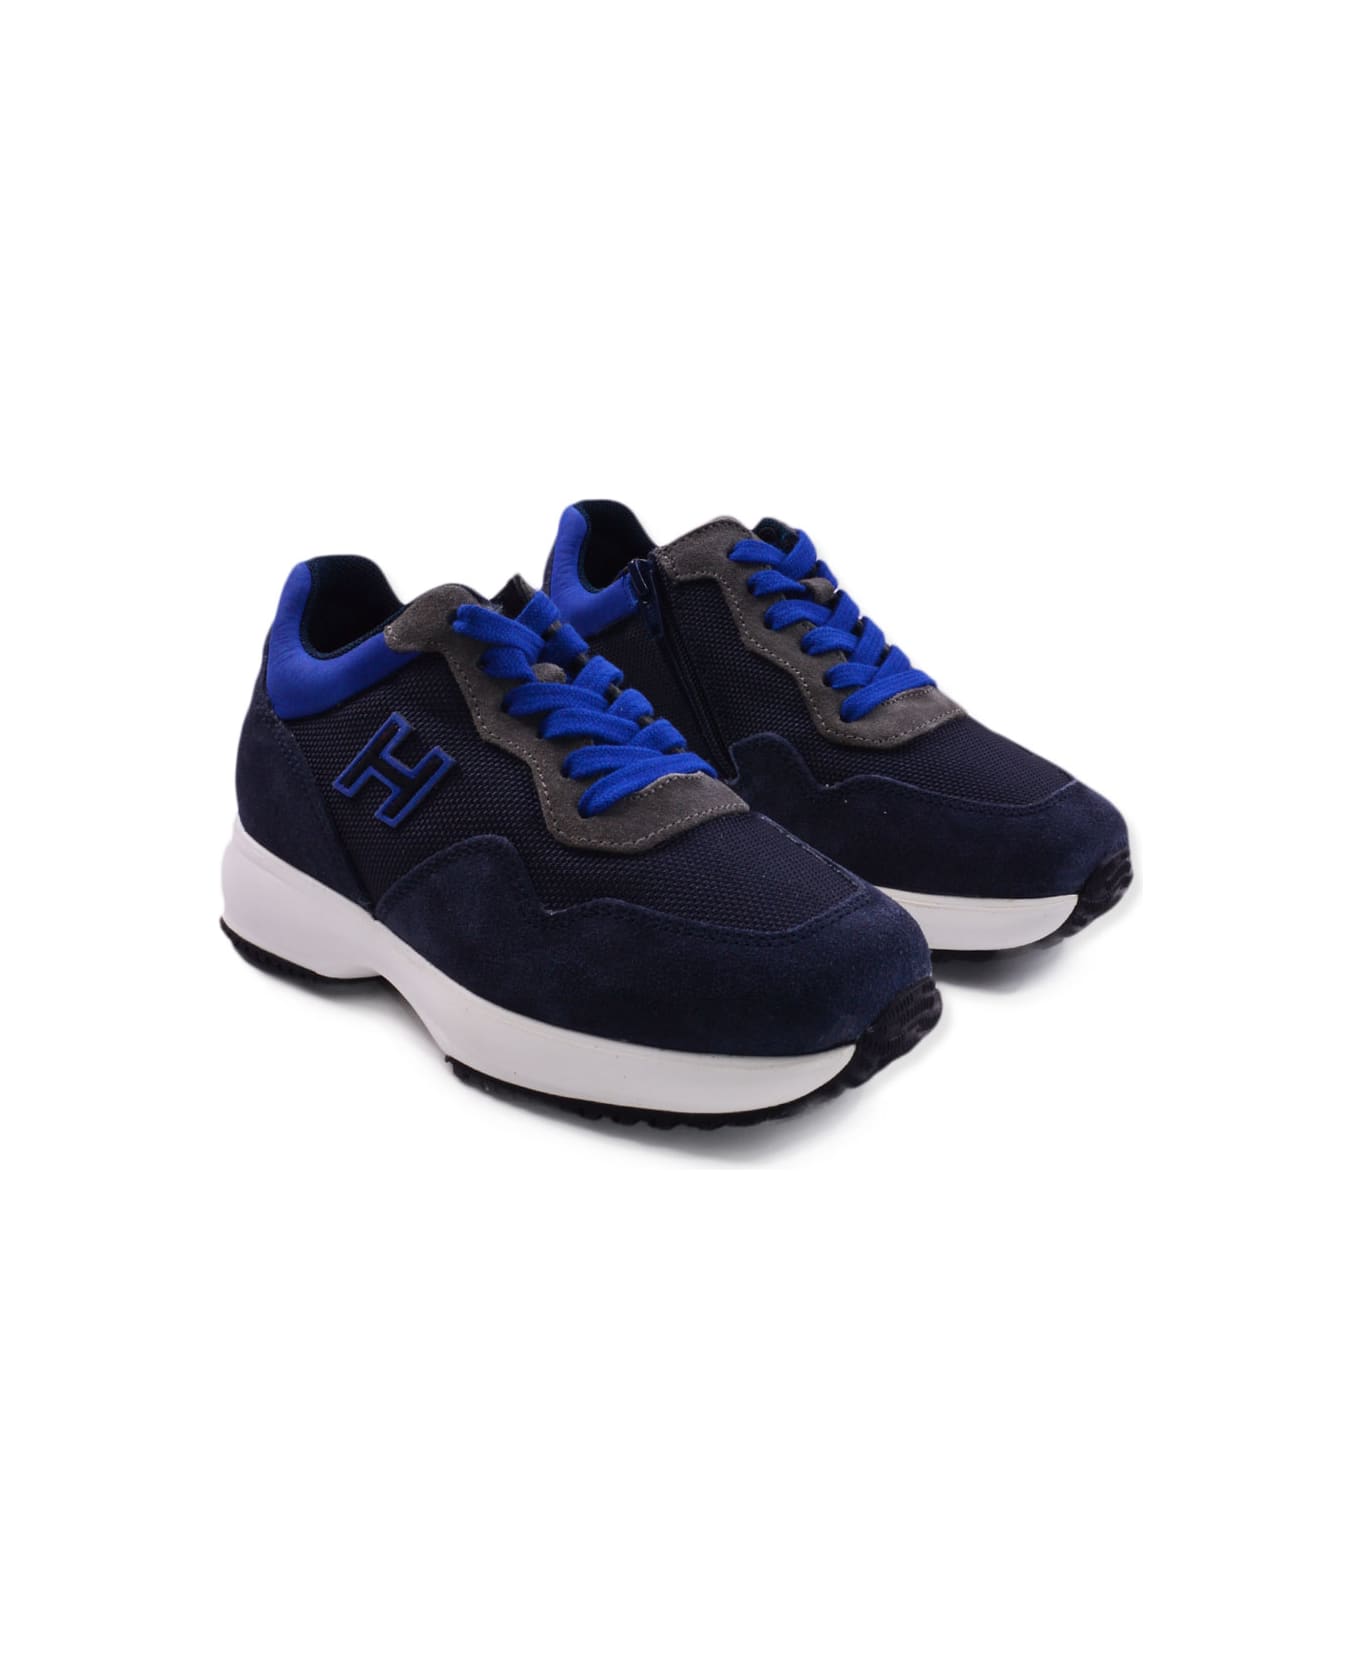 Hogan Interactive Shoe In Suede Leather - Blue